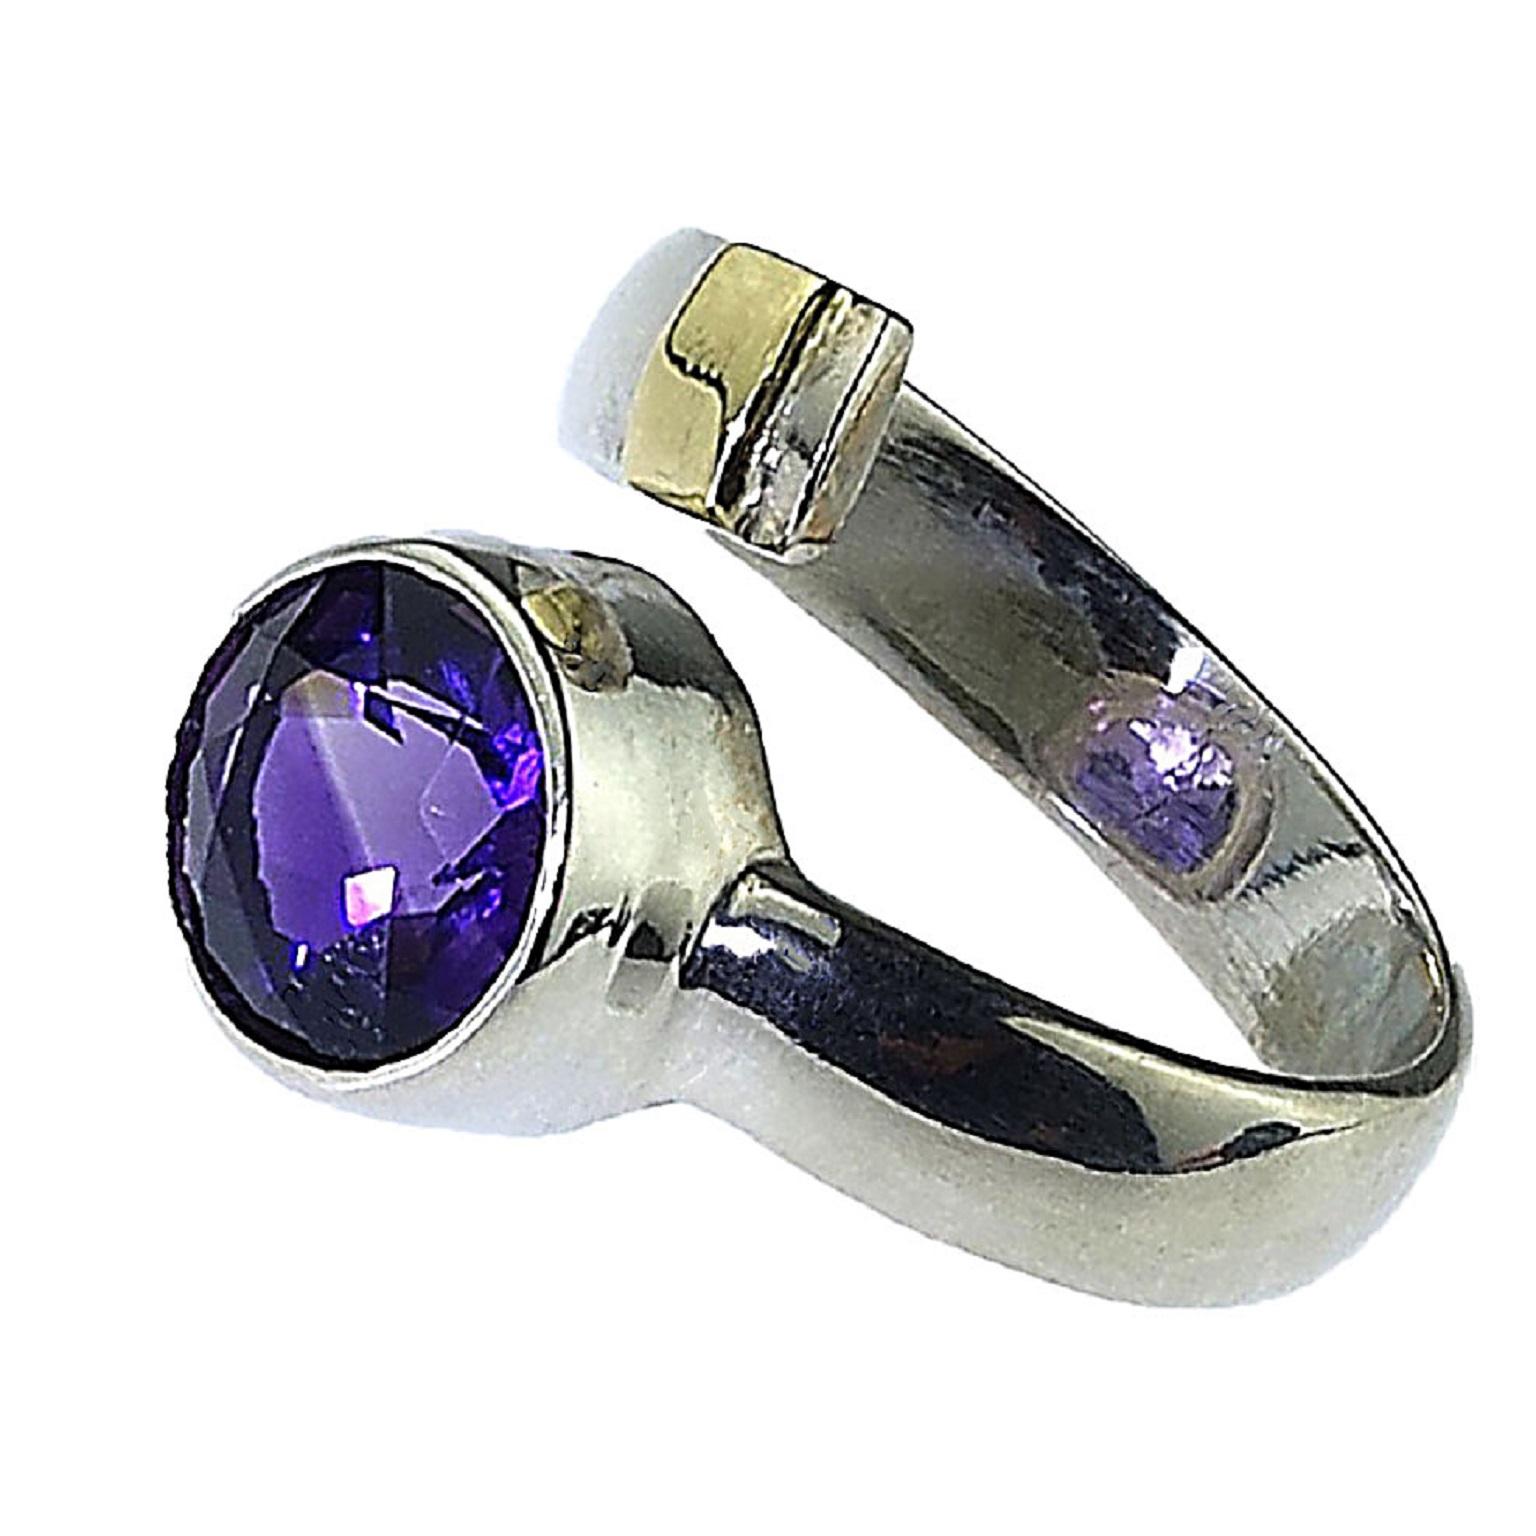 Women's AJD Crossover Amethyst and Sterling Silver Ring with 14K gold accent  